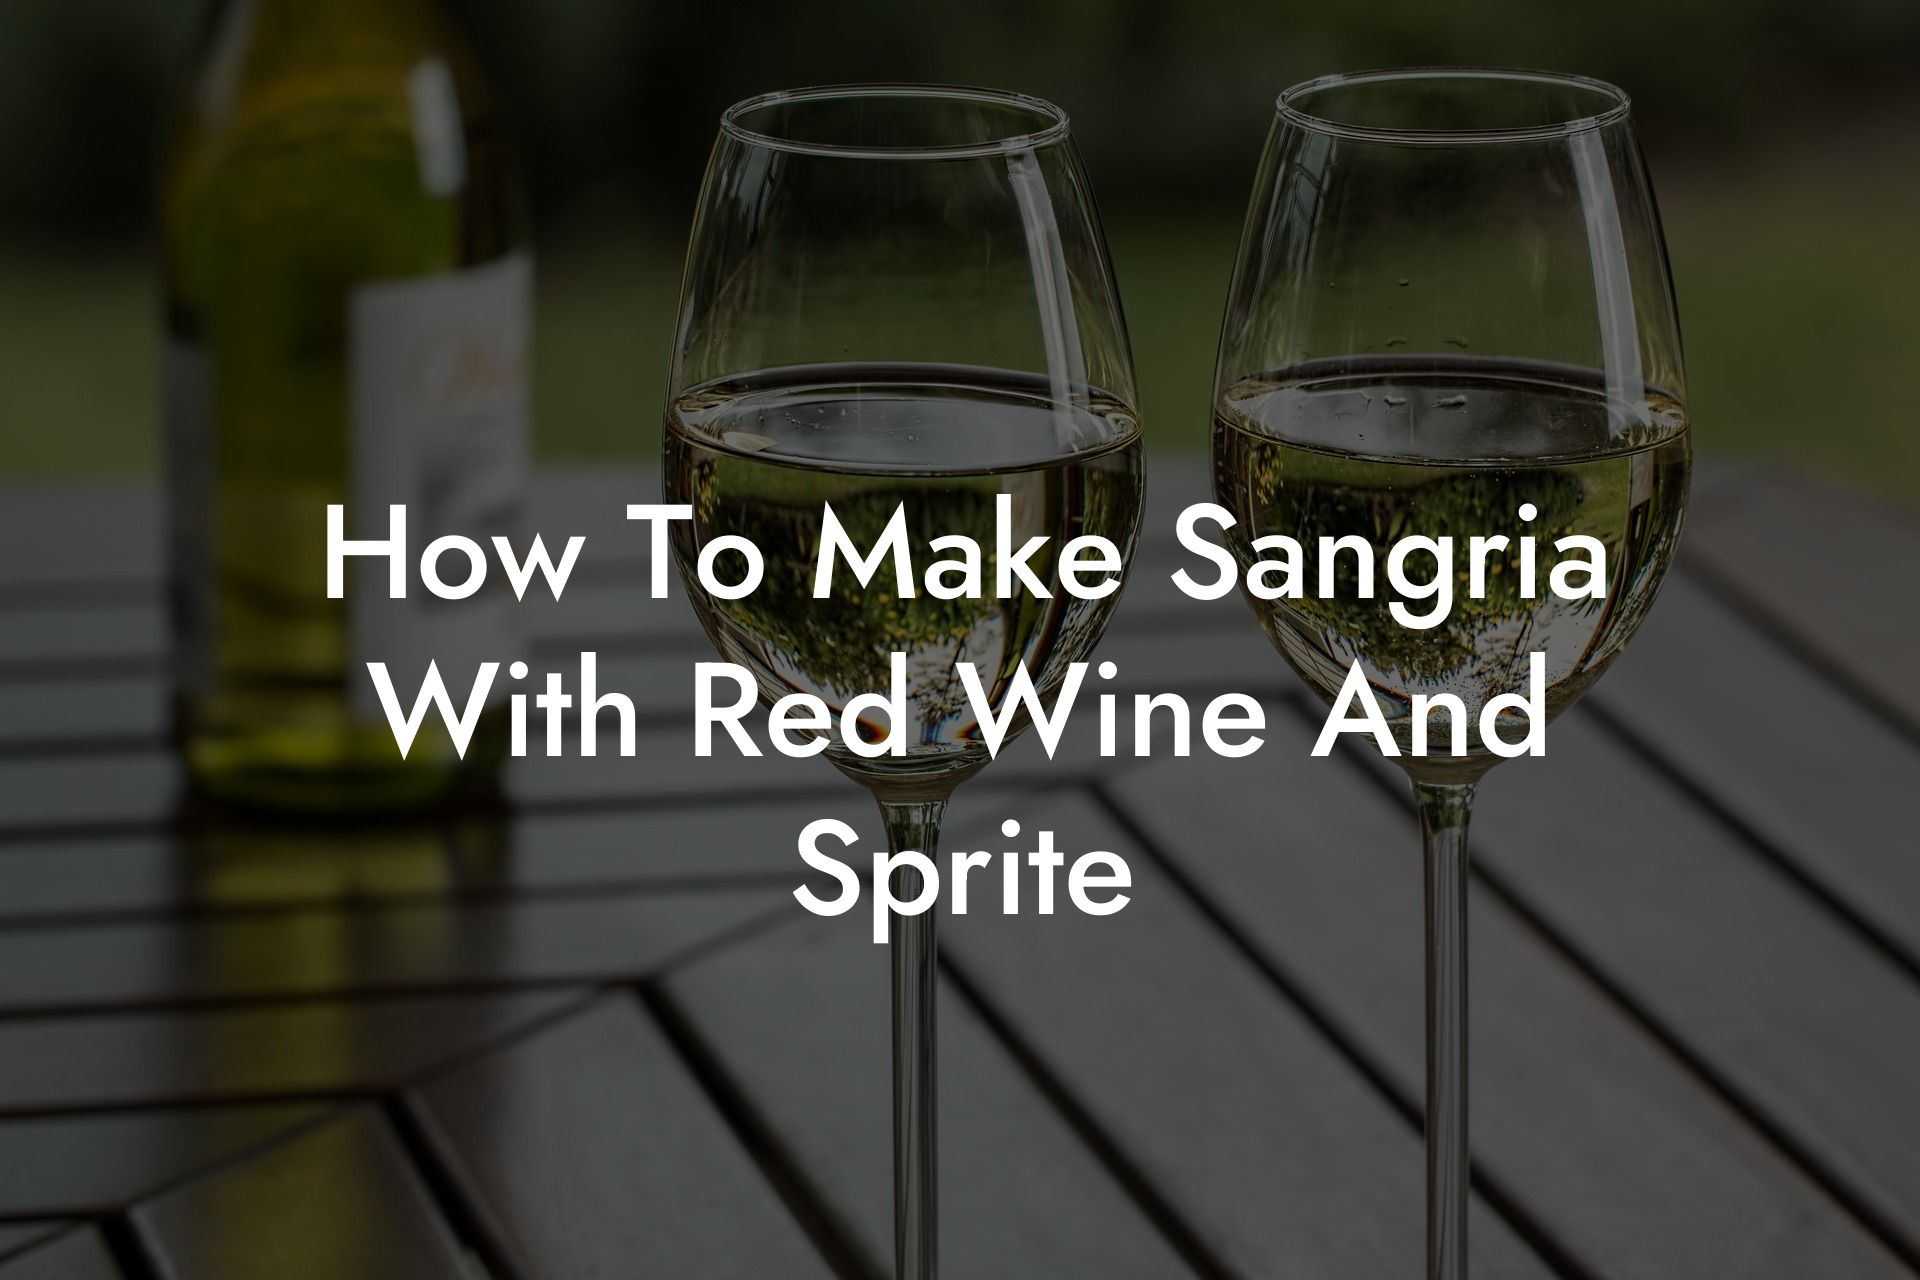 How To Make Sangria With Red Wine And Sprite